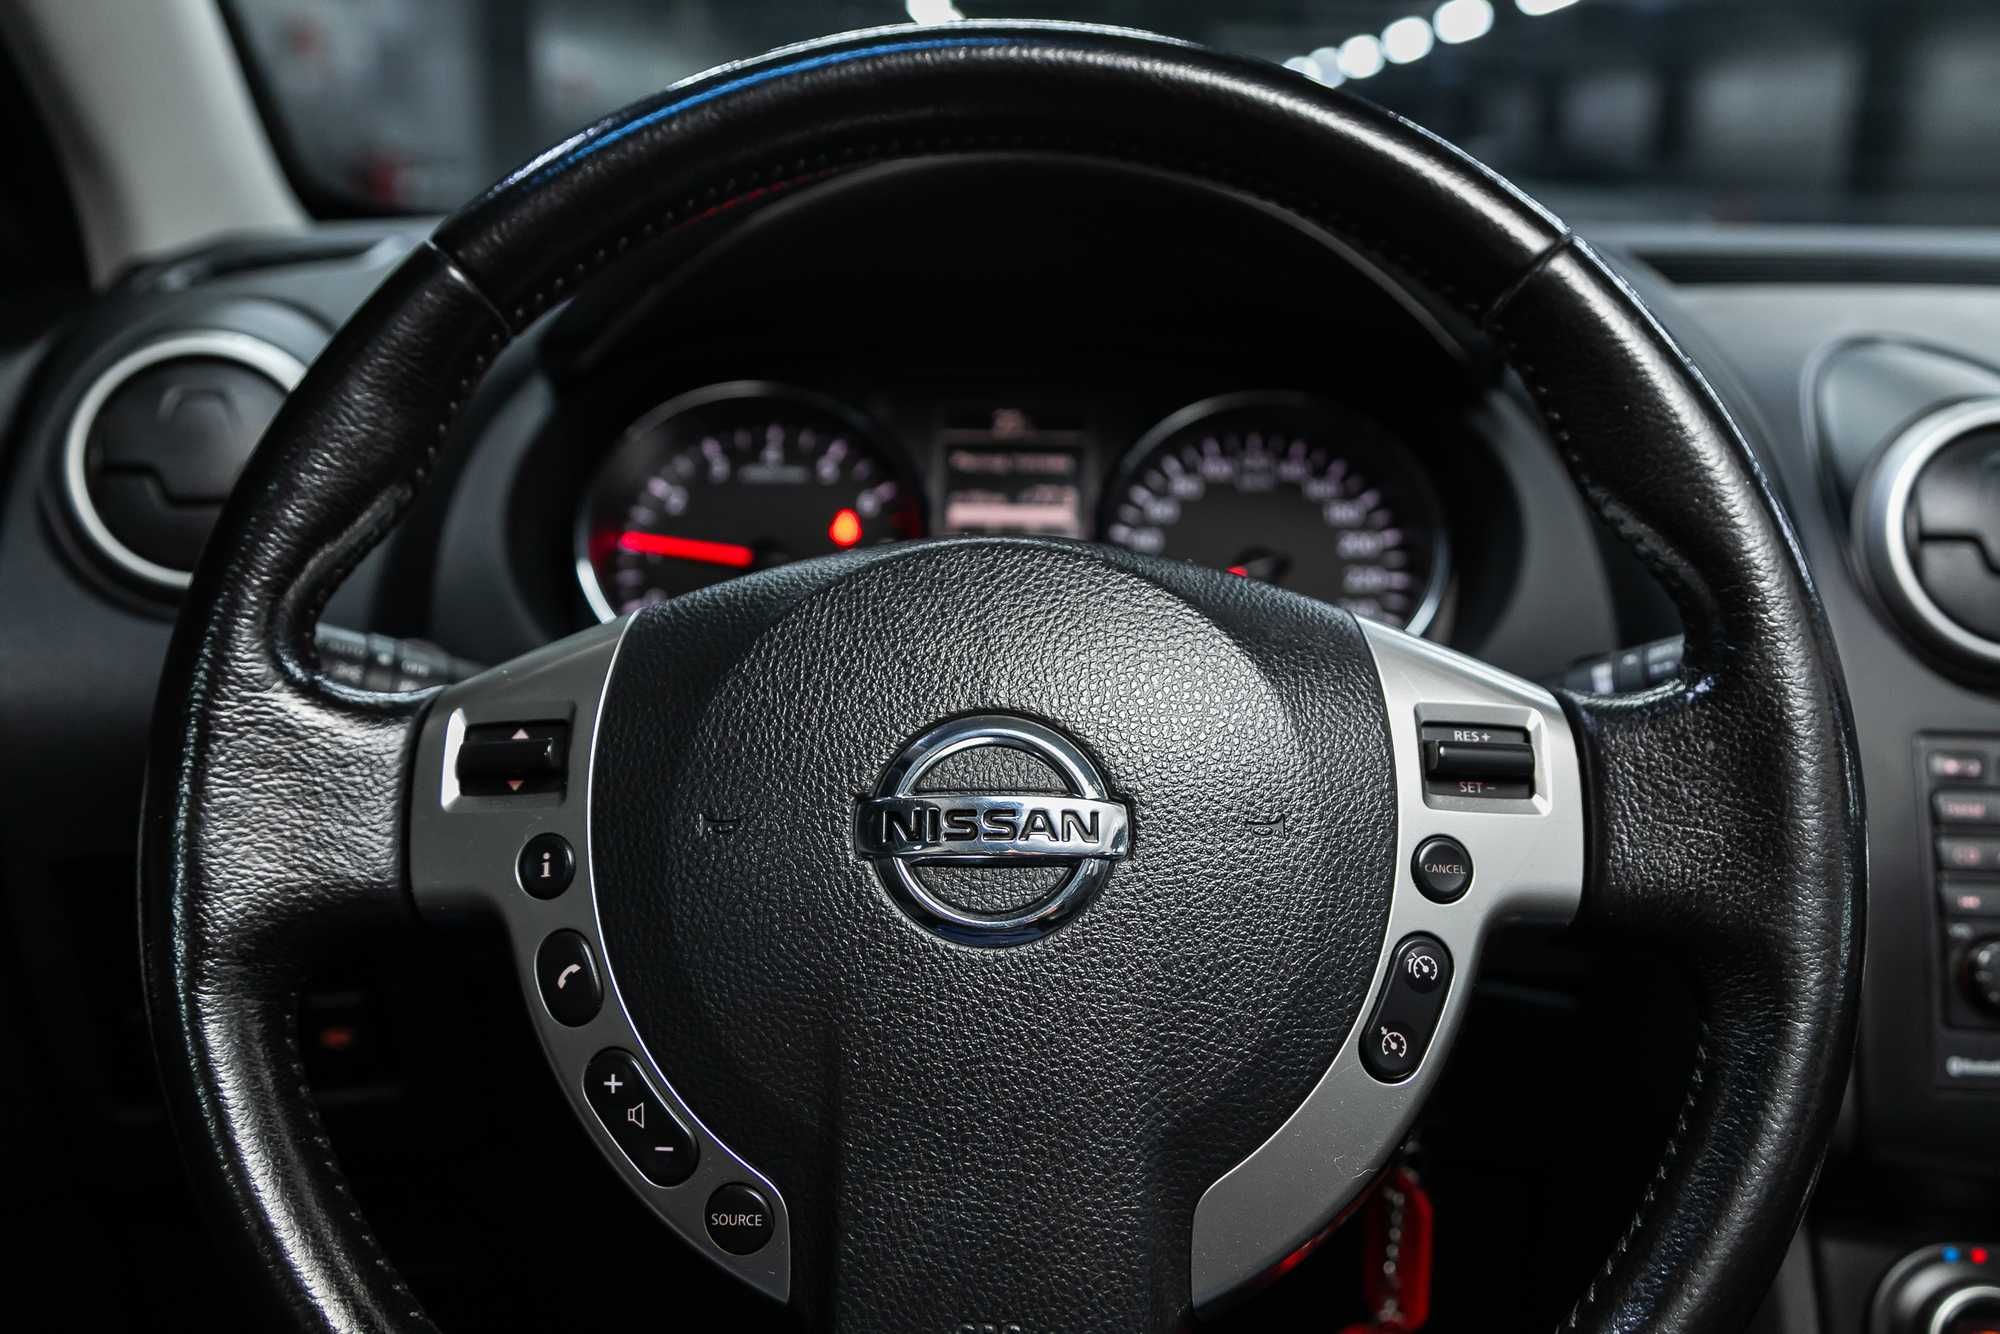 Nissan owners say that the warranty terms for vehicles are deceptive.